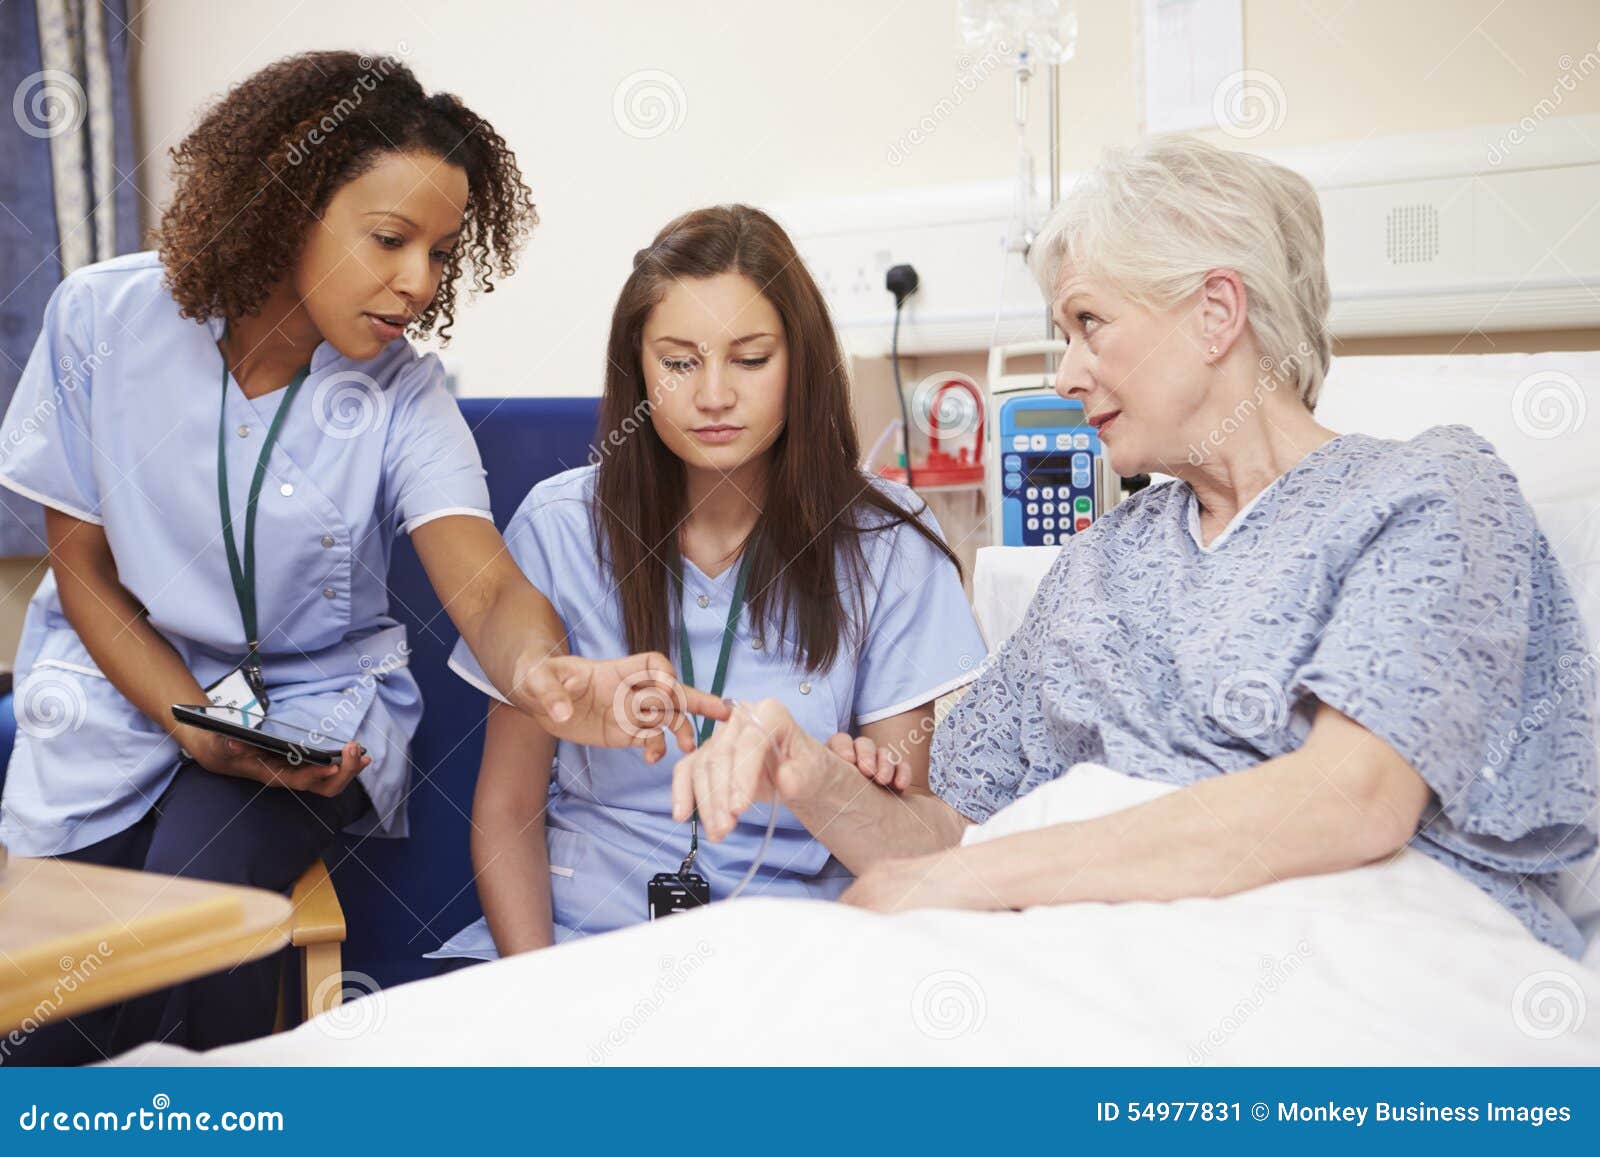 trainee nurse sitting by female patient's bed in hospital